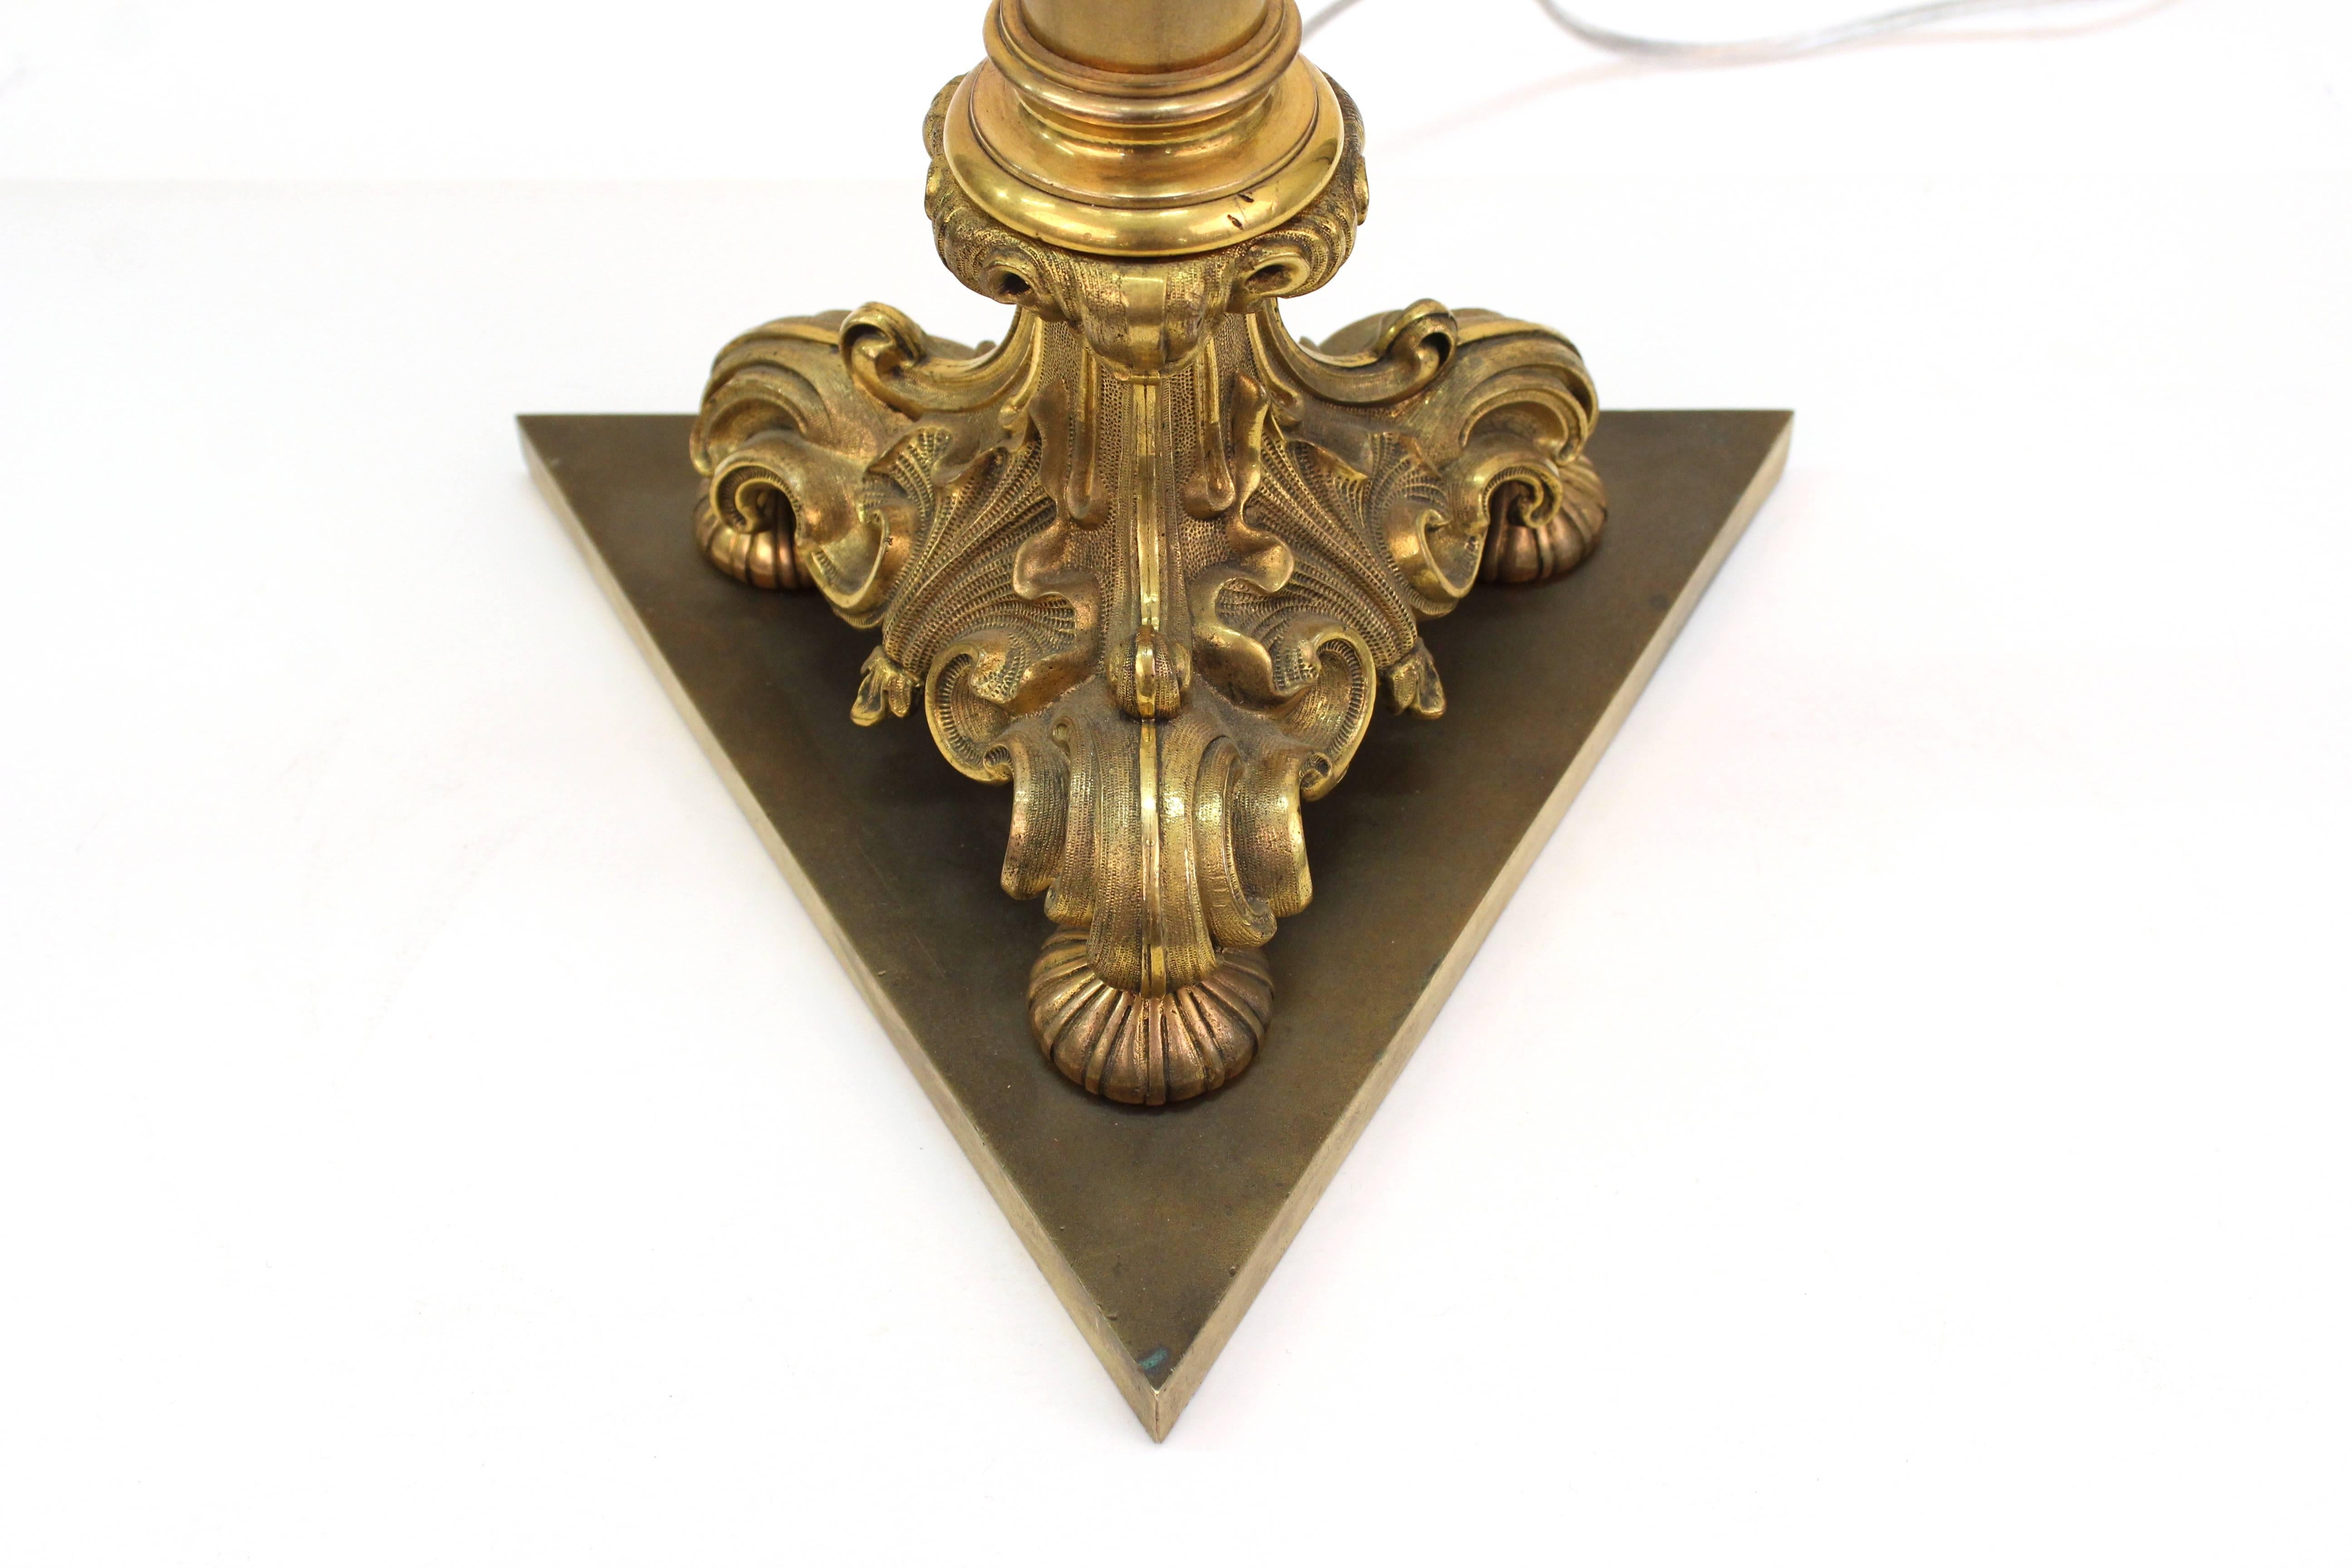 A pair of early 20th century neoclassical style bronze lamps with new mica shades. The lamps are newly rewired and in excellent condition. Maximum height to finial is 38 inches.